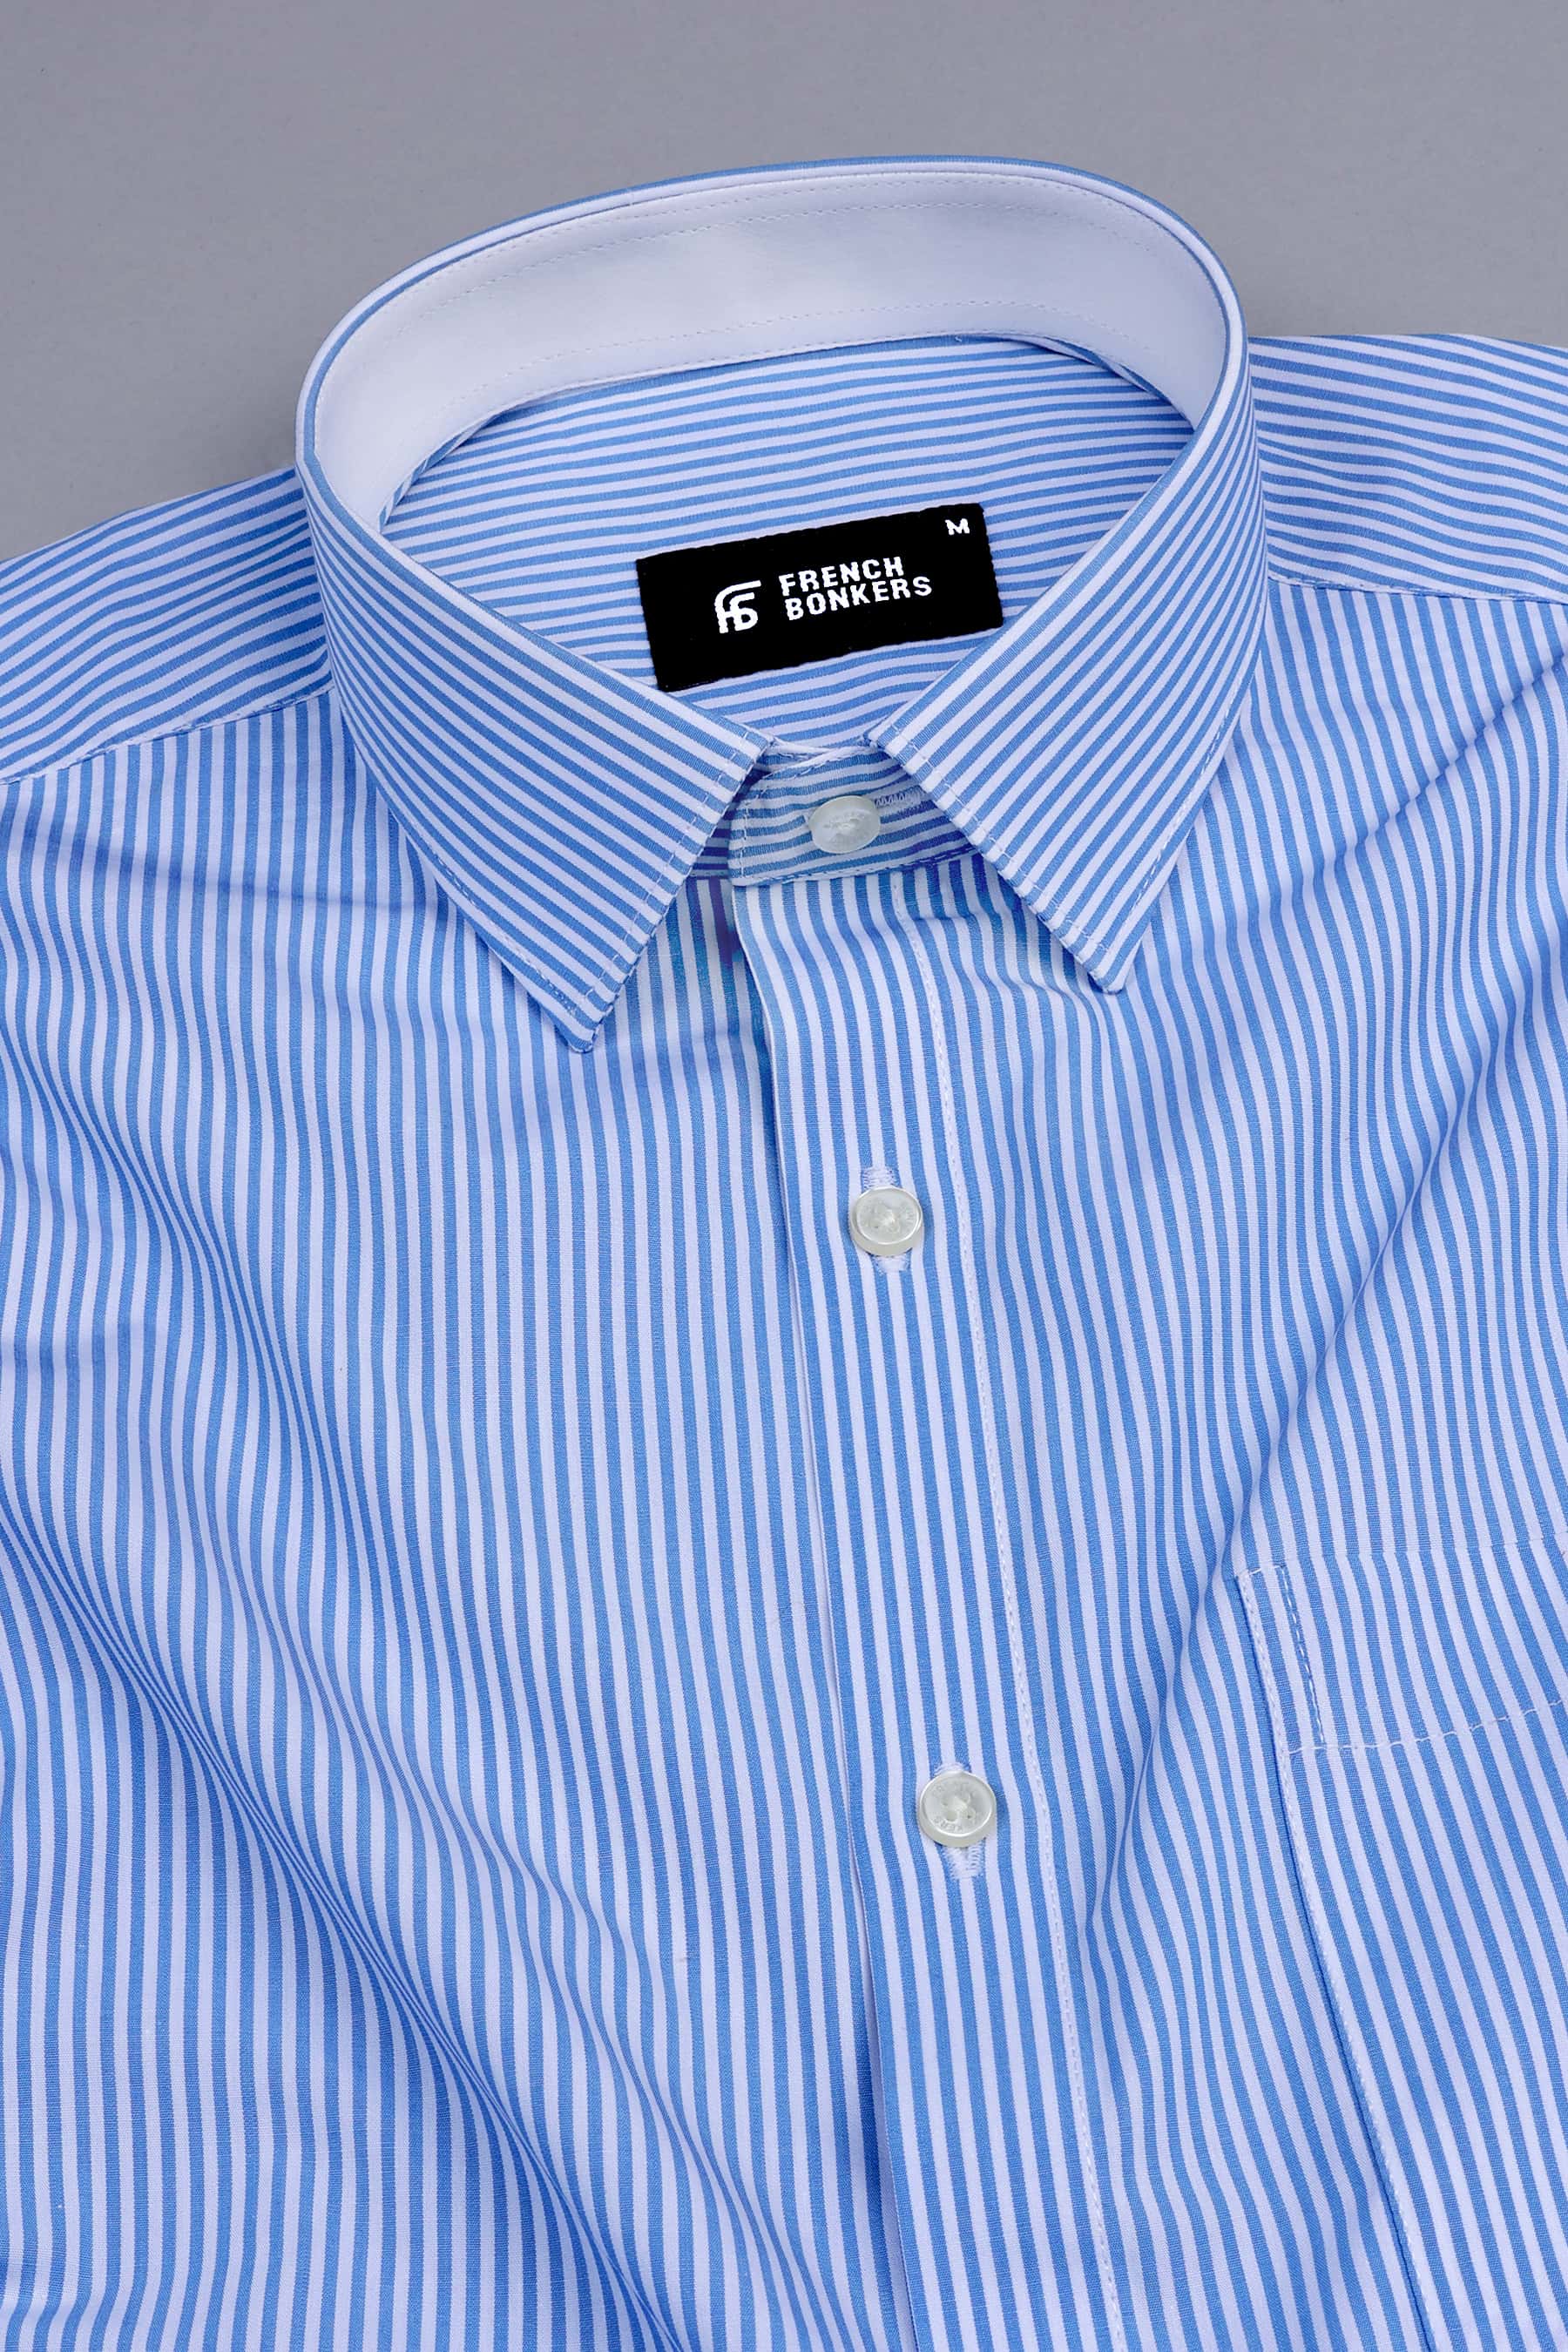 White with UN blue lines bengal stripe shirt